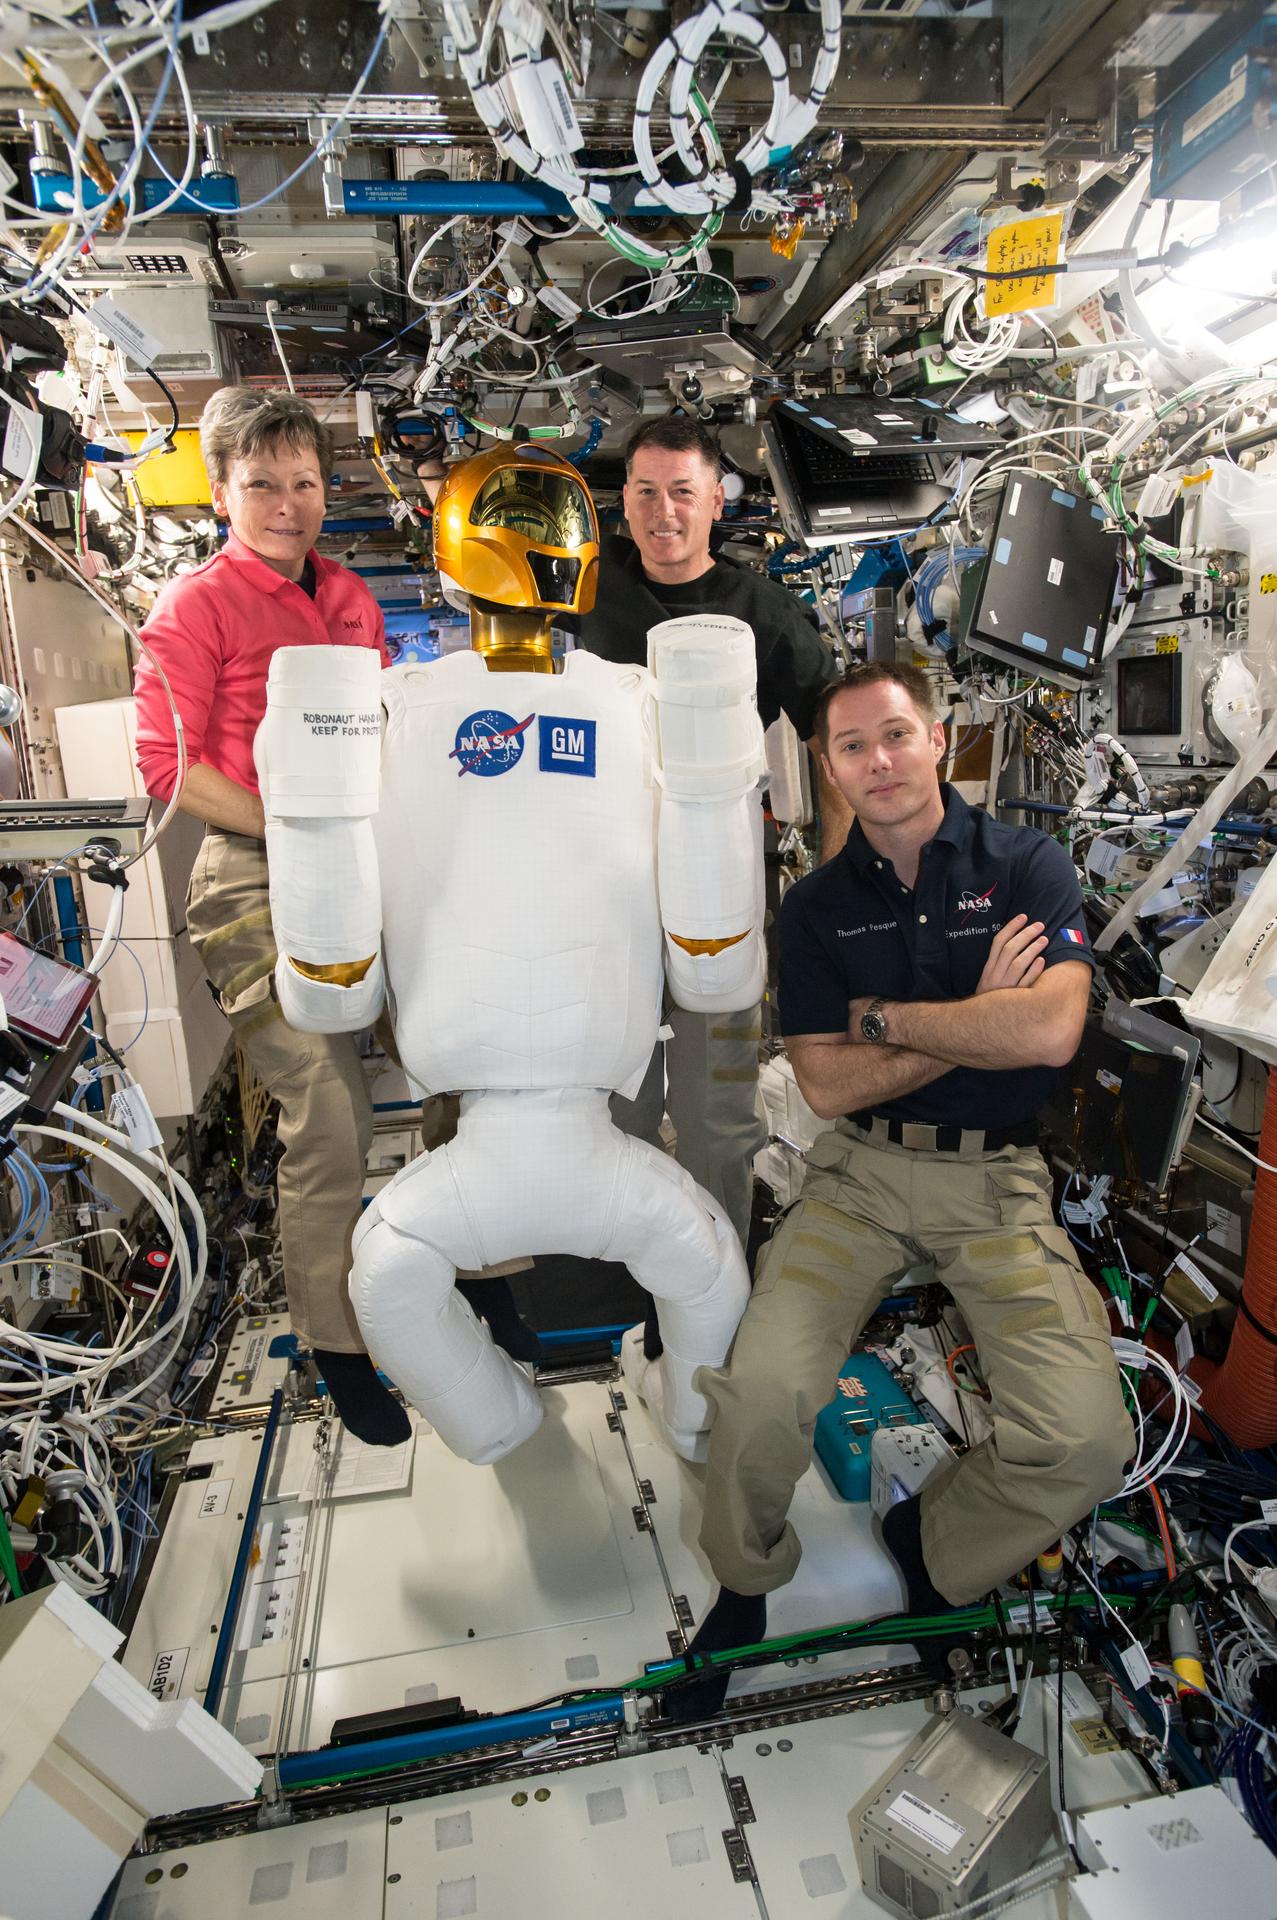 Peggy Whitson, Shane Kimbrough, and European Space Agency (ESA) astronaut Thomas Pesquet posing with Robonaut in the U.S. Laboratory.